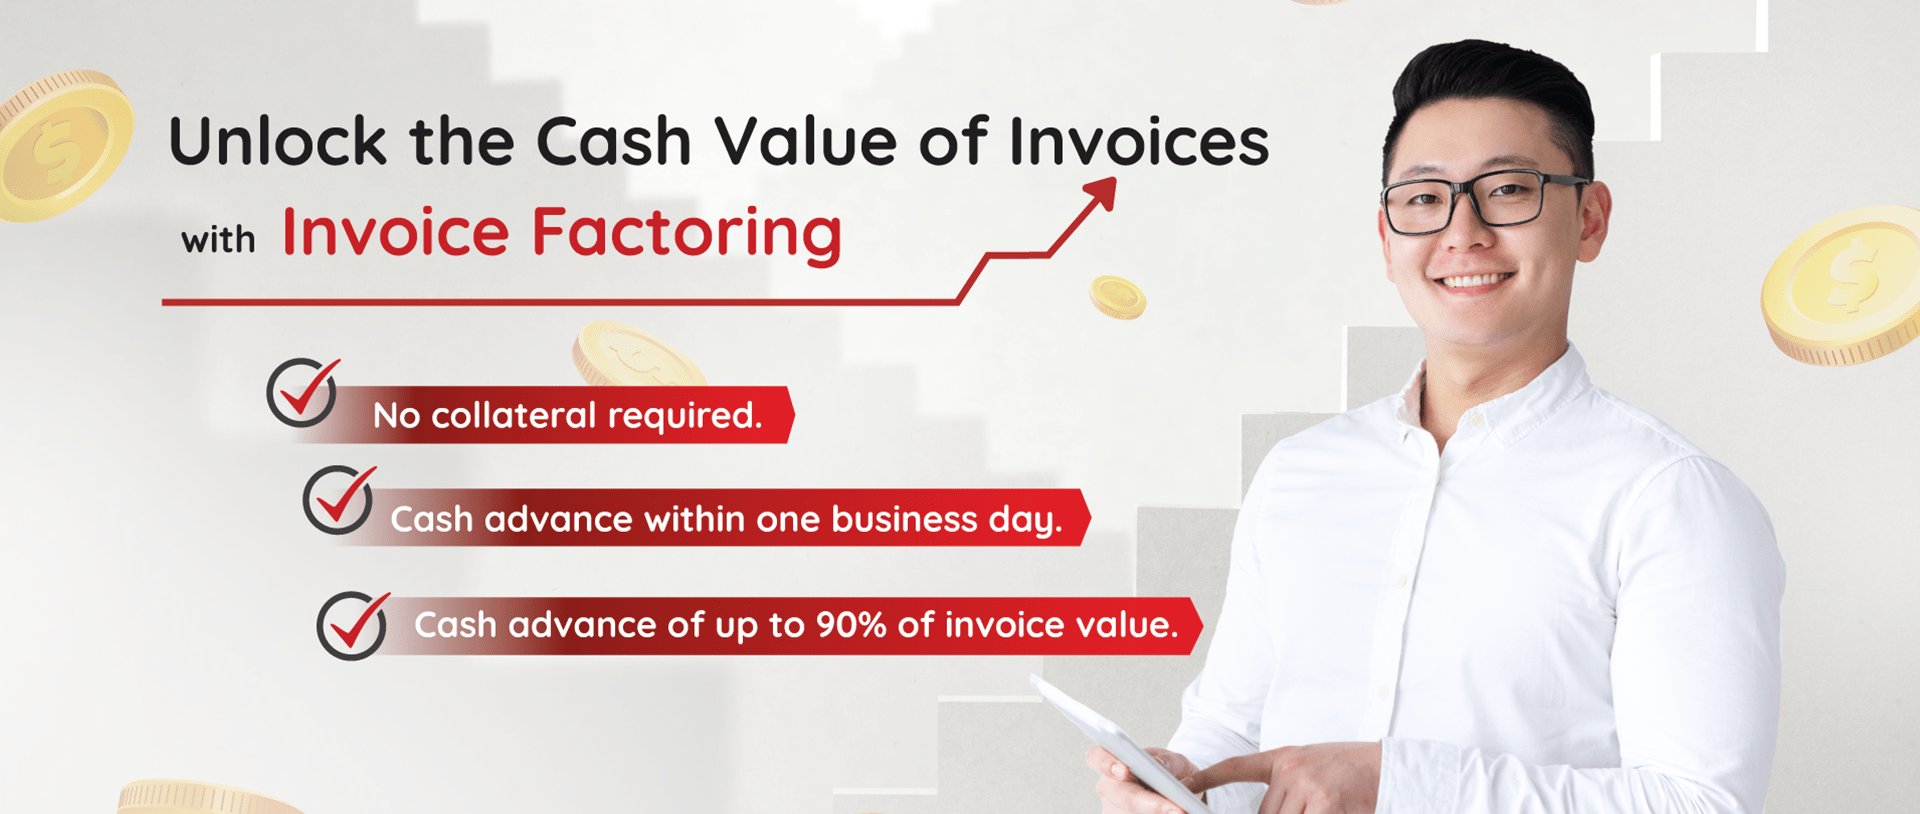 Unlock the Cash Value of Invoices with Invoice Factoring